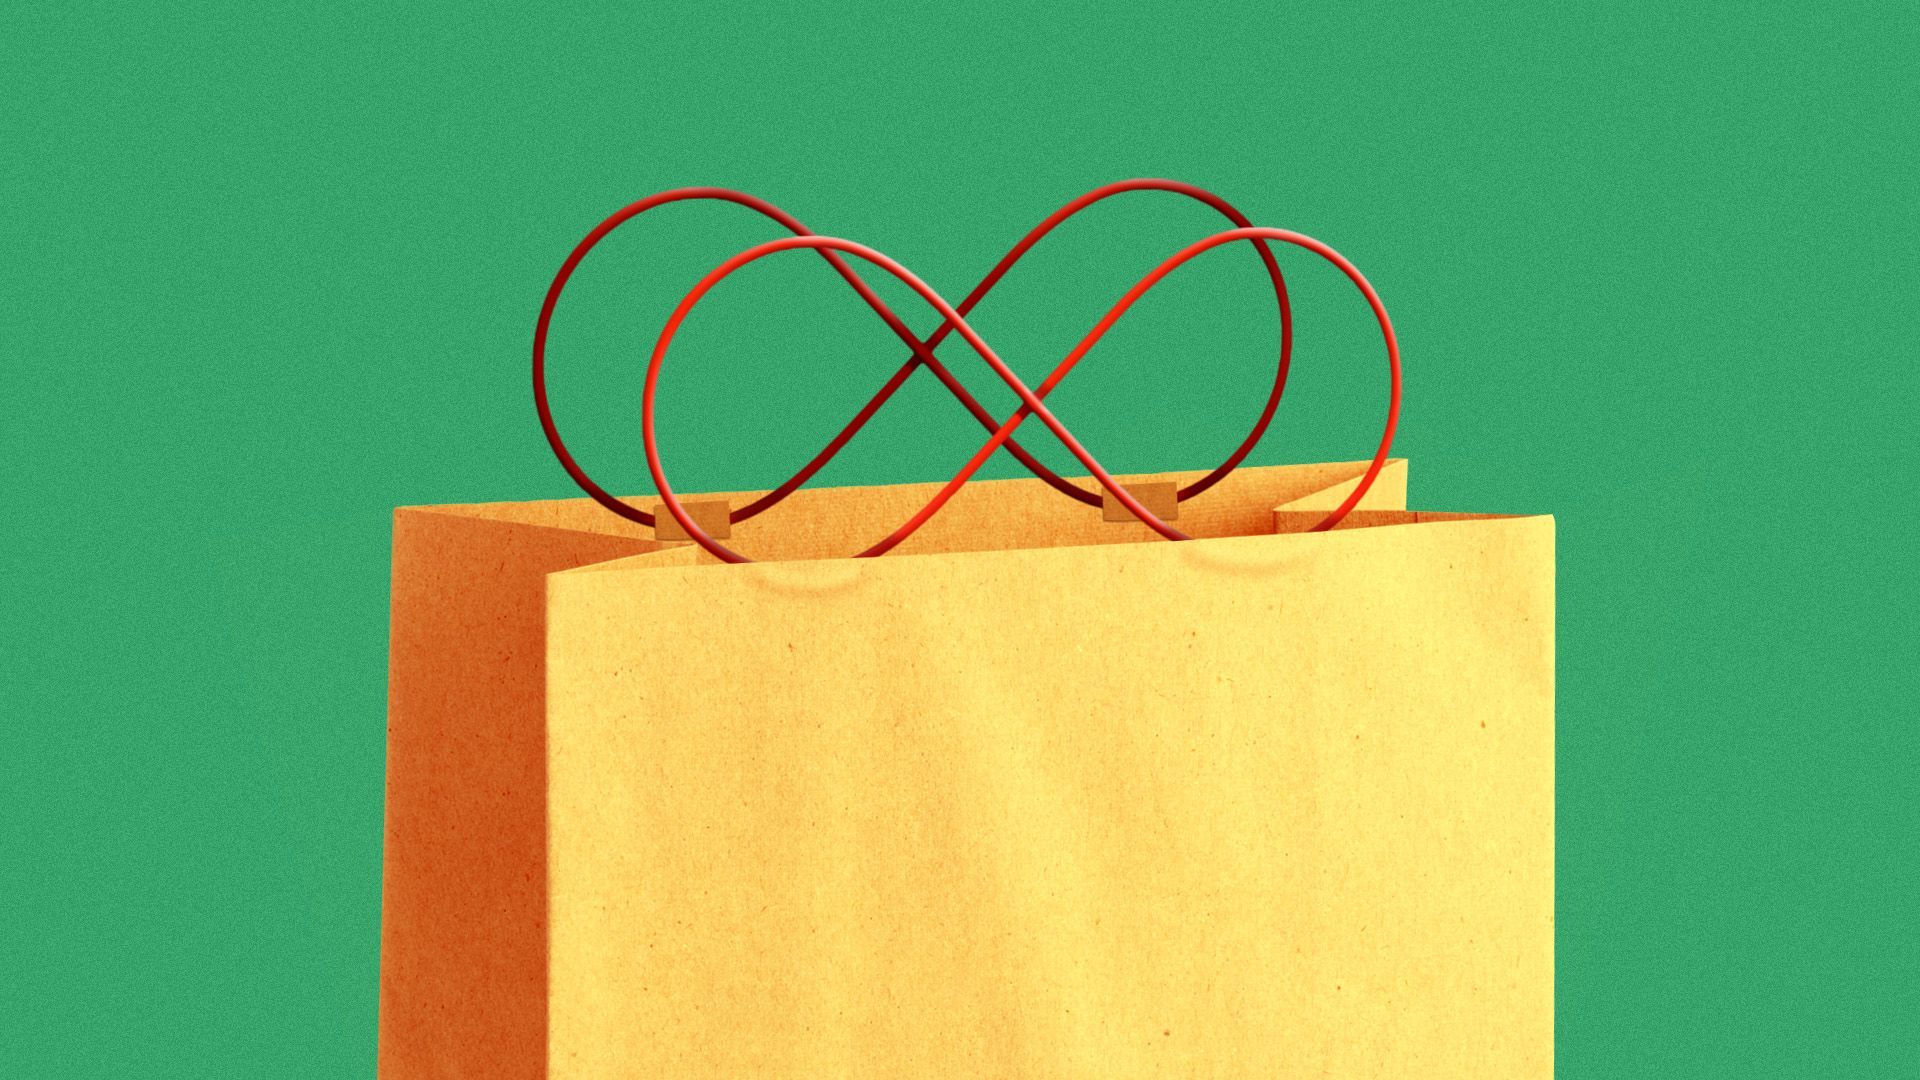 Illustration of a shopping bag with infinity-symbol handles